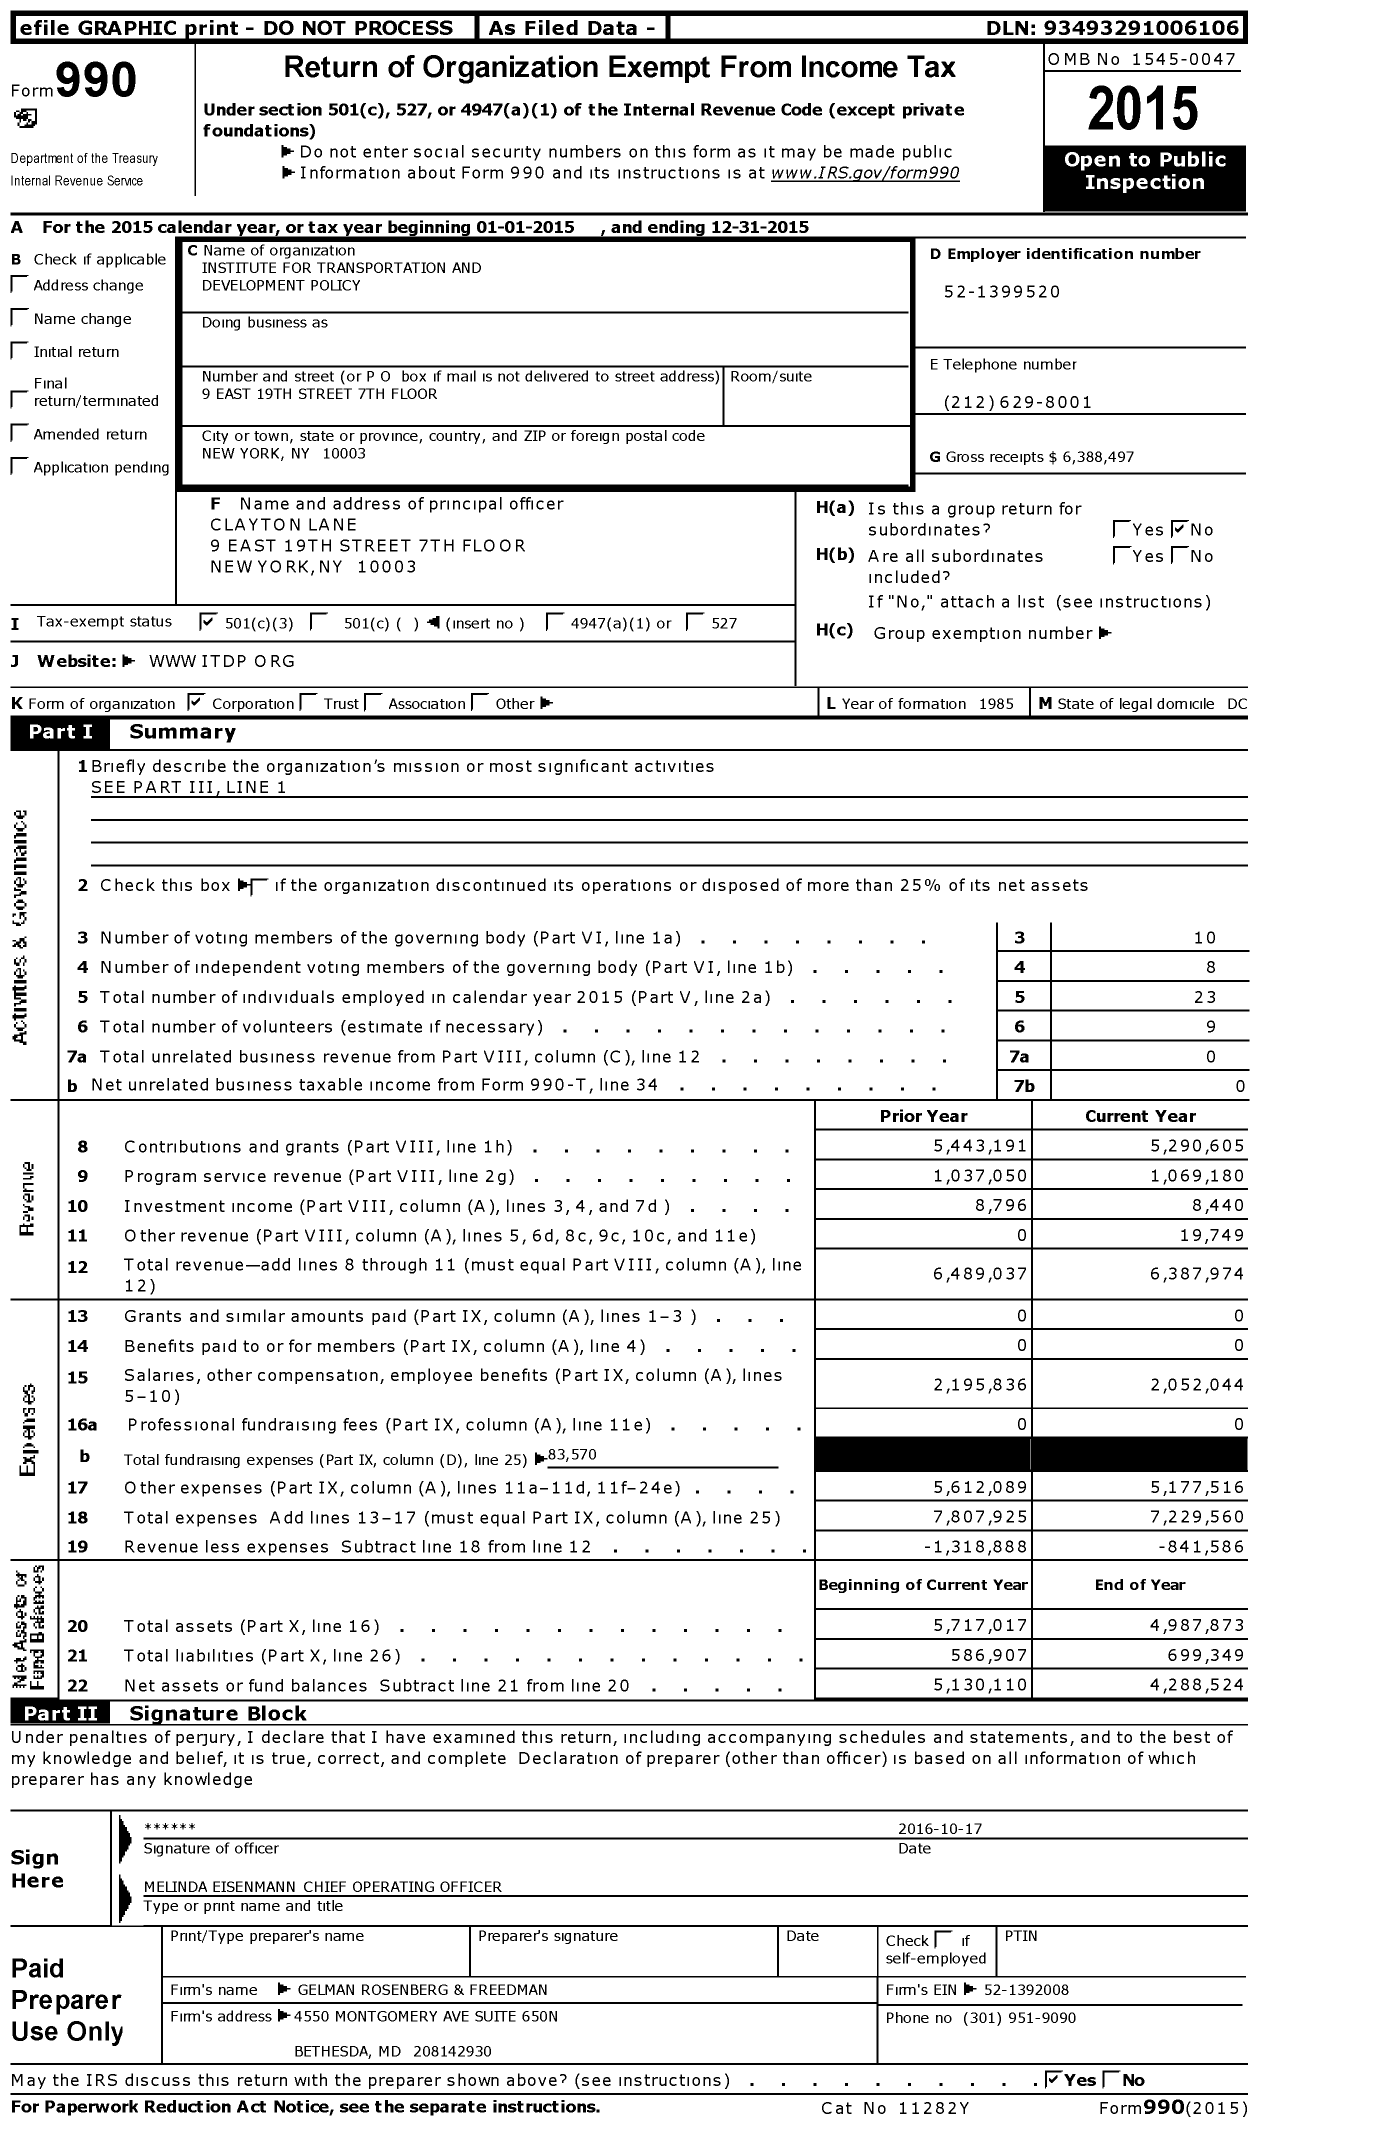 Image of first page of 2015 Form 990 for Institute for Transportation and Development Policy (ITDP)